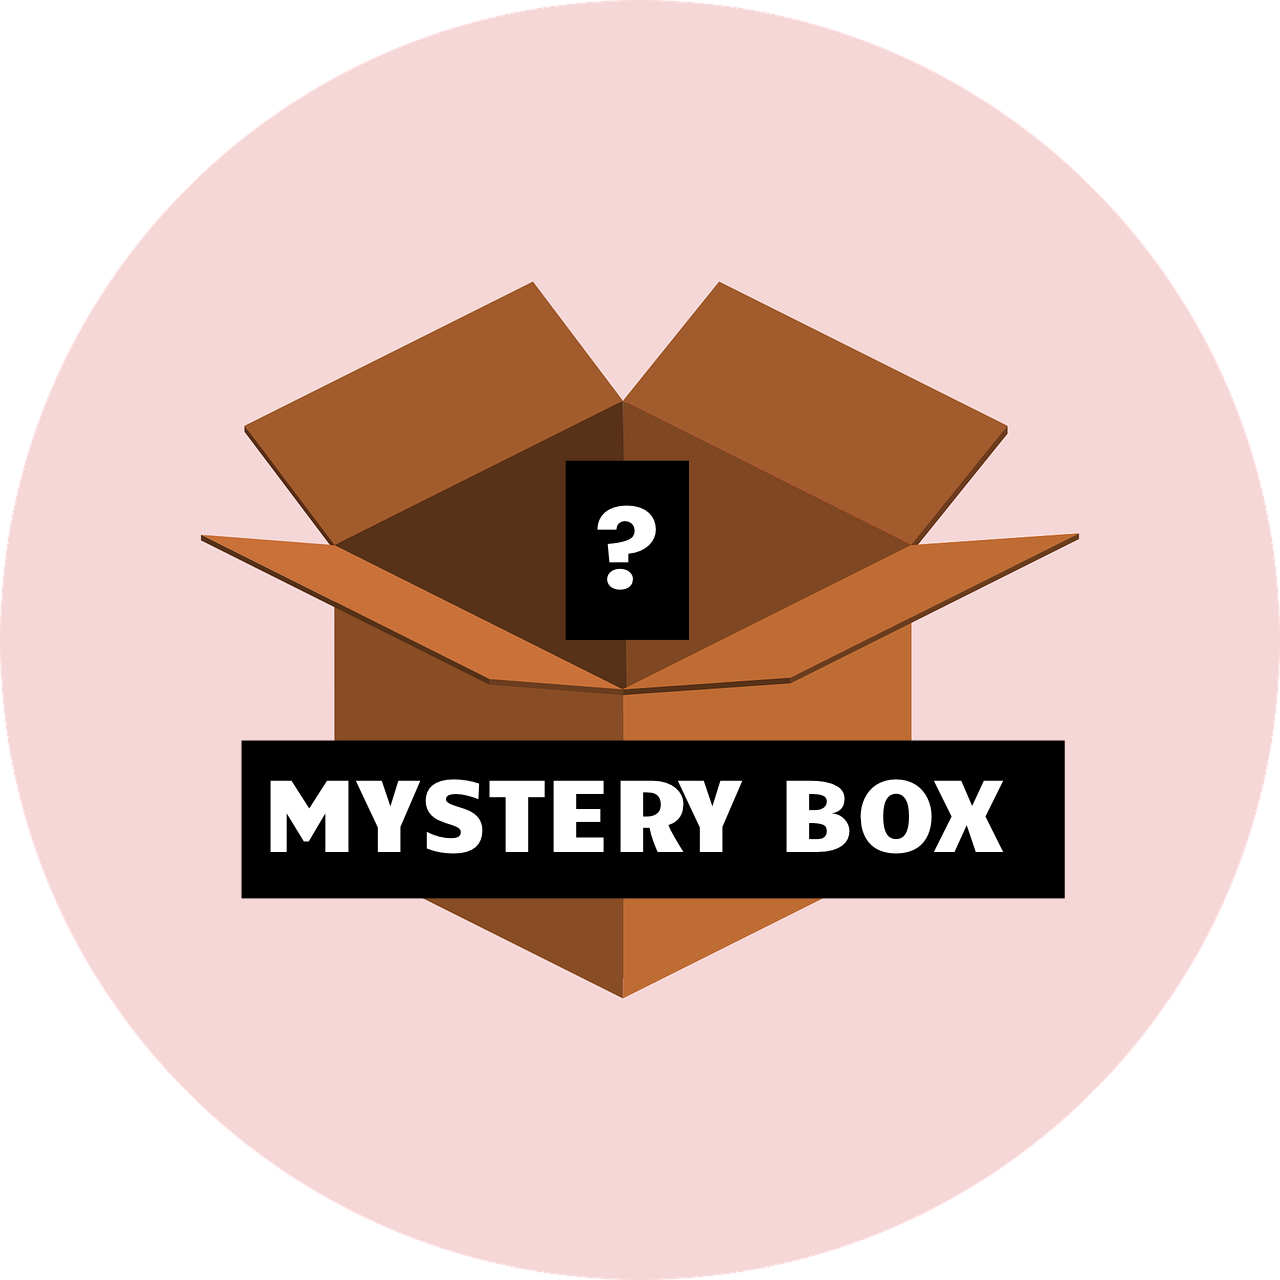 Whiskey Mystery Box Mega Edition $1,000.00 Value (Pappy Van Winkle Vertical  $23k In Value)